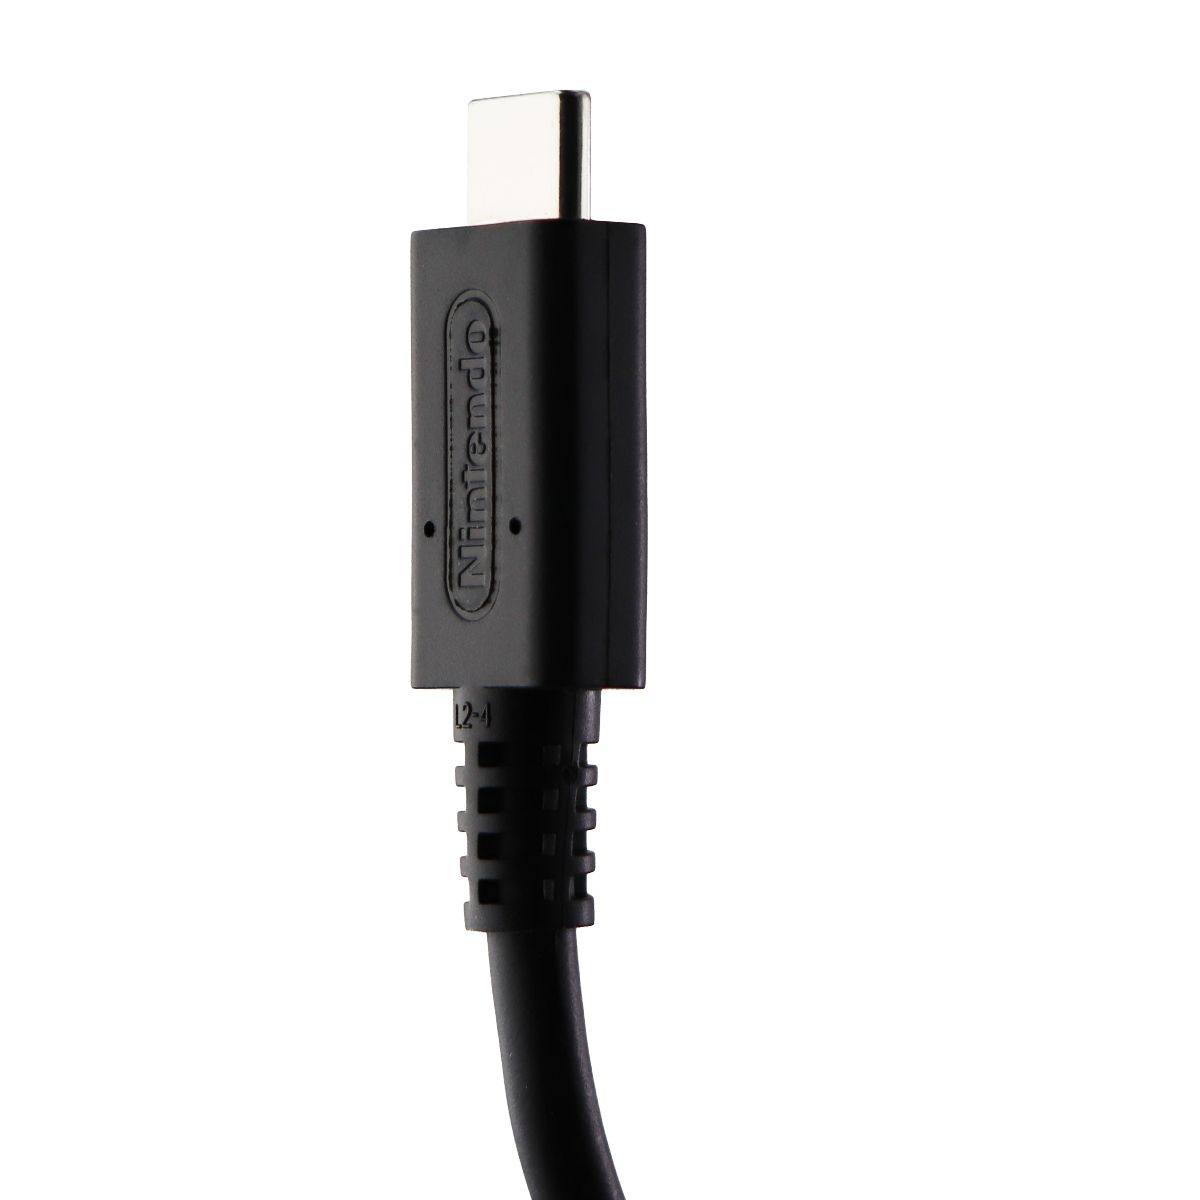 Restored Nintendo Switch AC Adapter Wall Charger USB-C Cable - Black OEM (HACAADHGA) (Refurbished) - image 3 of 4